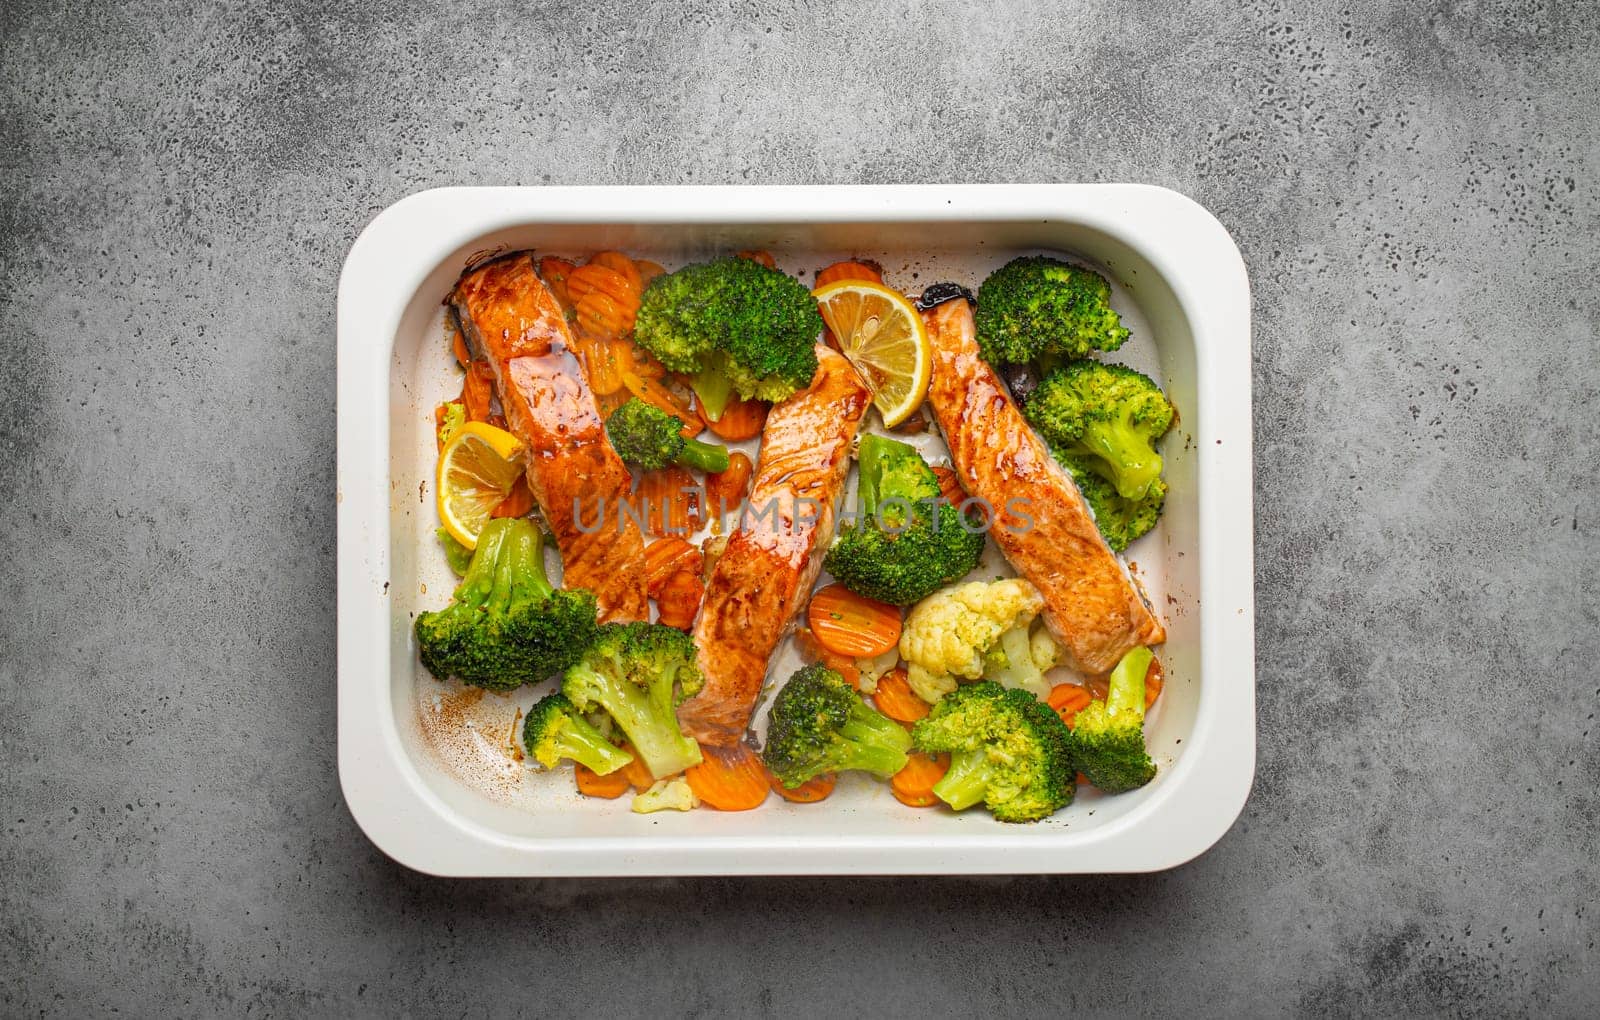 Top view of healthy baked fish salmon steaks, broccoli, cauliflower, carrot in casserole dish. Cooking a delicious low carb dinner, healthy nutrition concept by its_al_dente